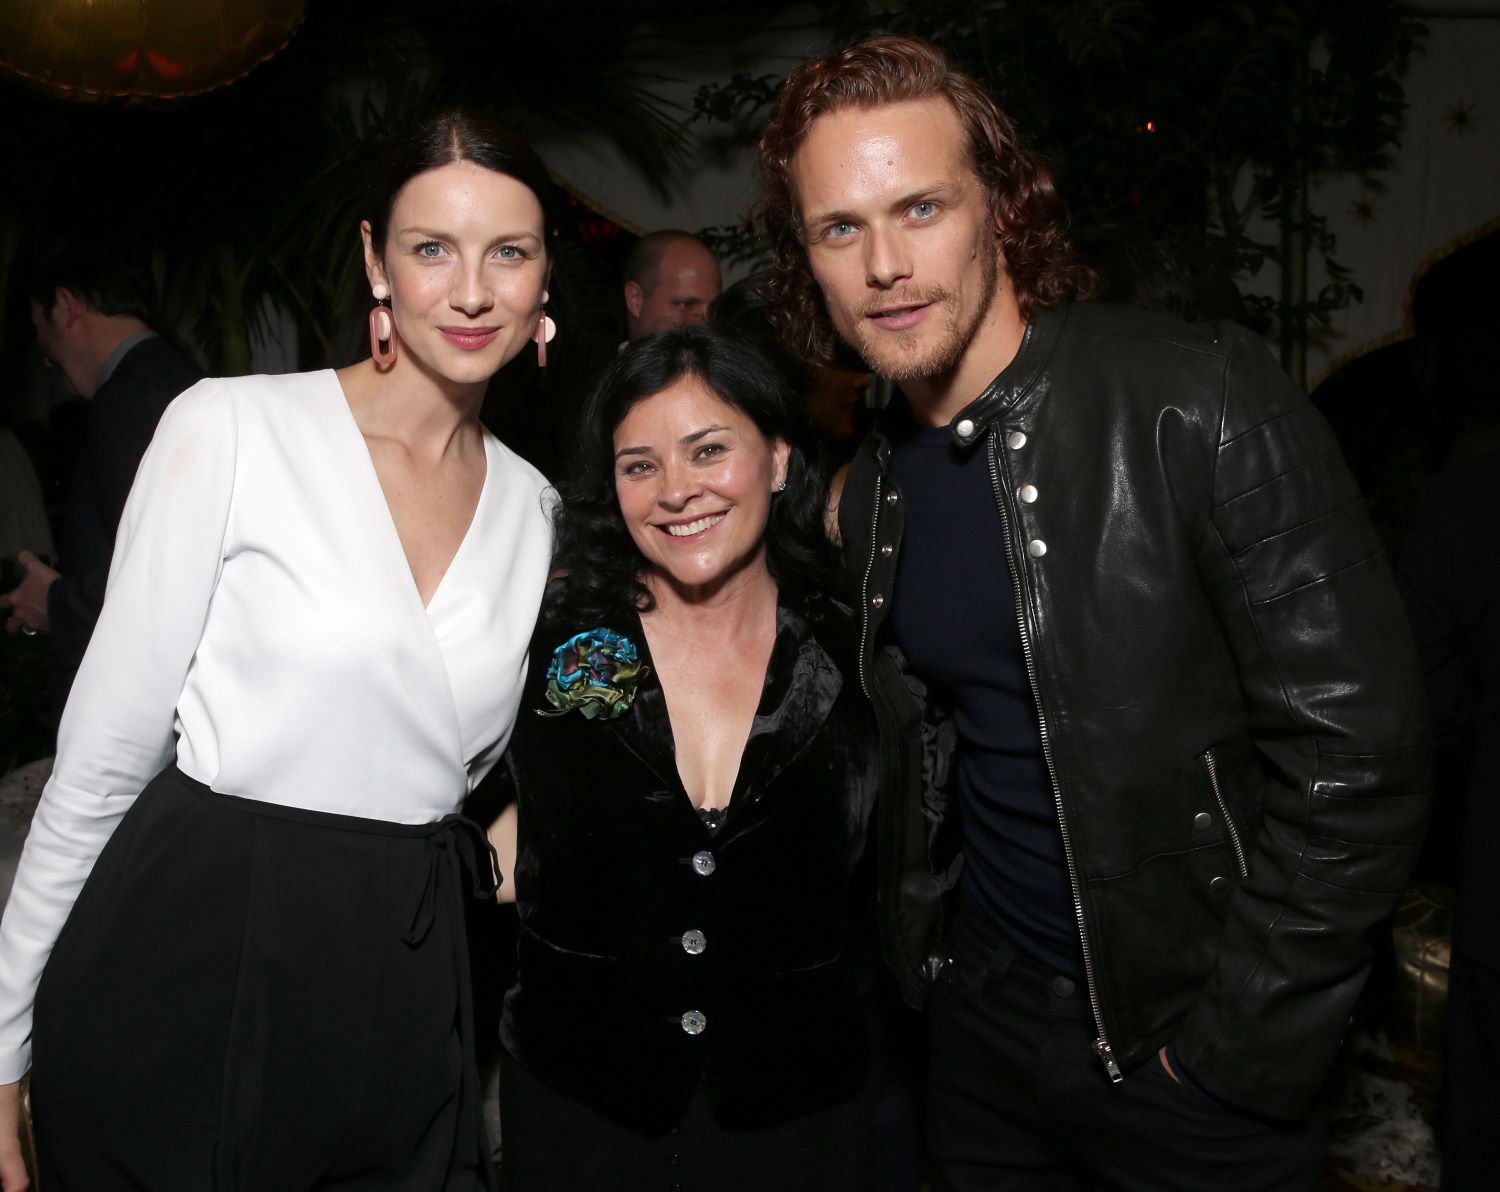 Outlander stars Caitriona Balfe and Sam Heughan with author Diana Gabaldon attend the Starz Pre-Golden Globe Celebration at Chateau Marmont on January 8, 2016